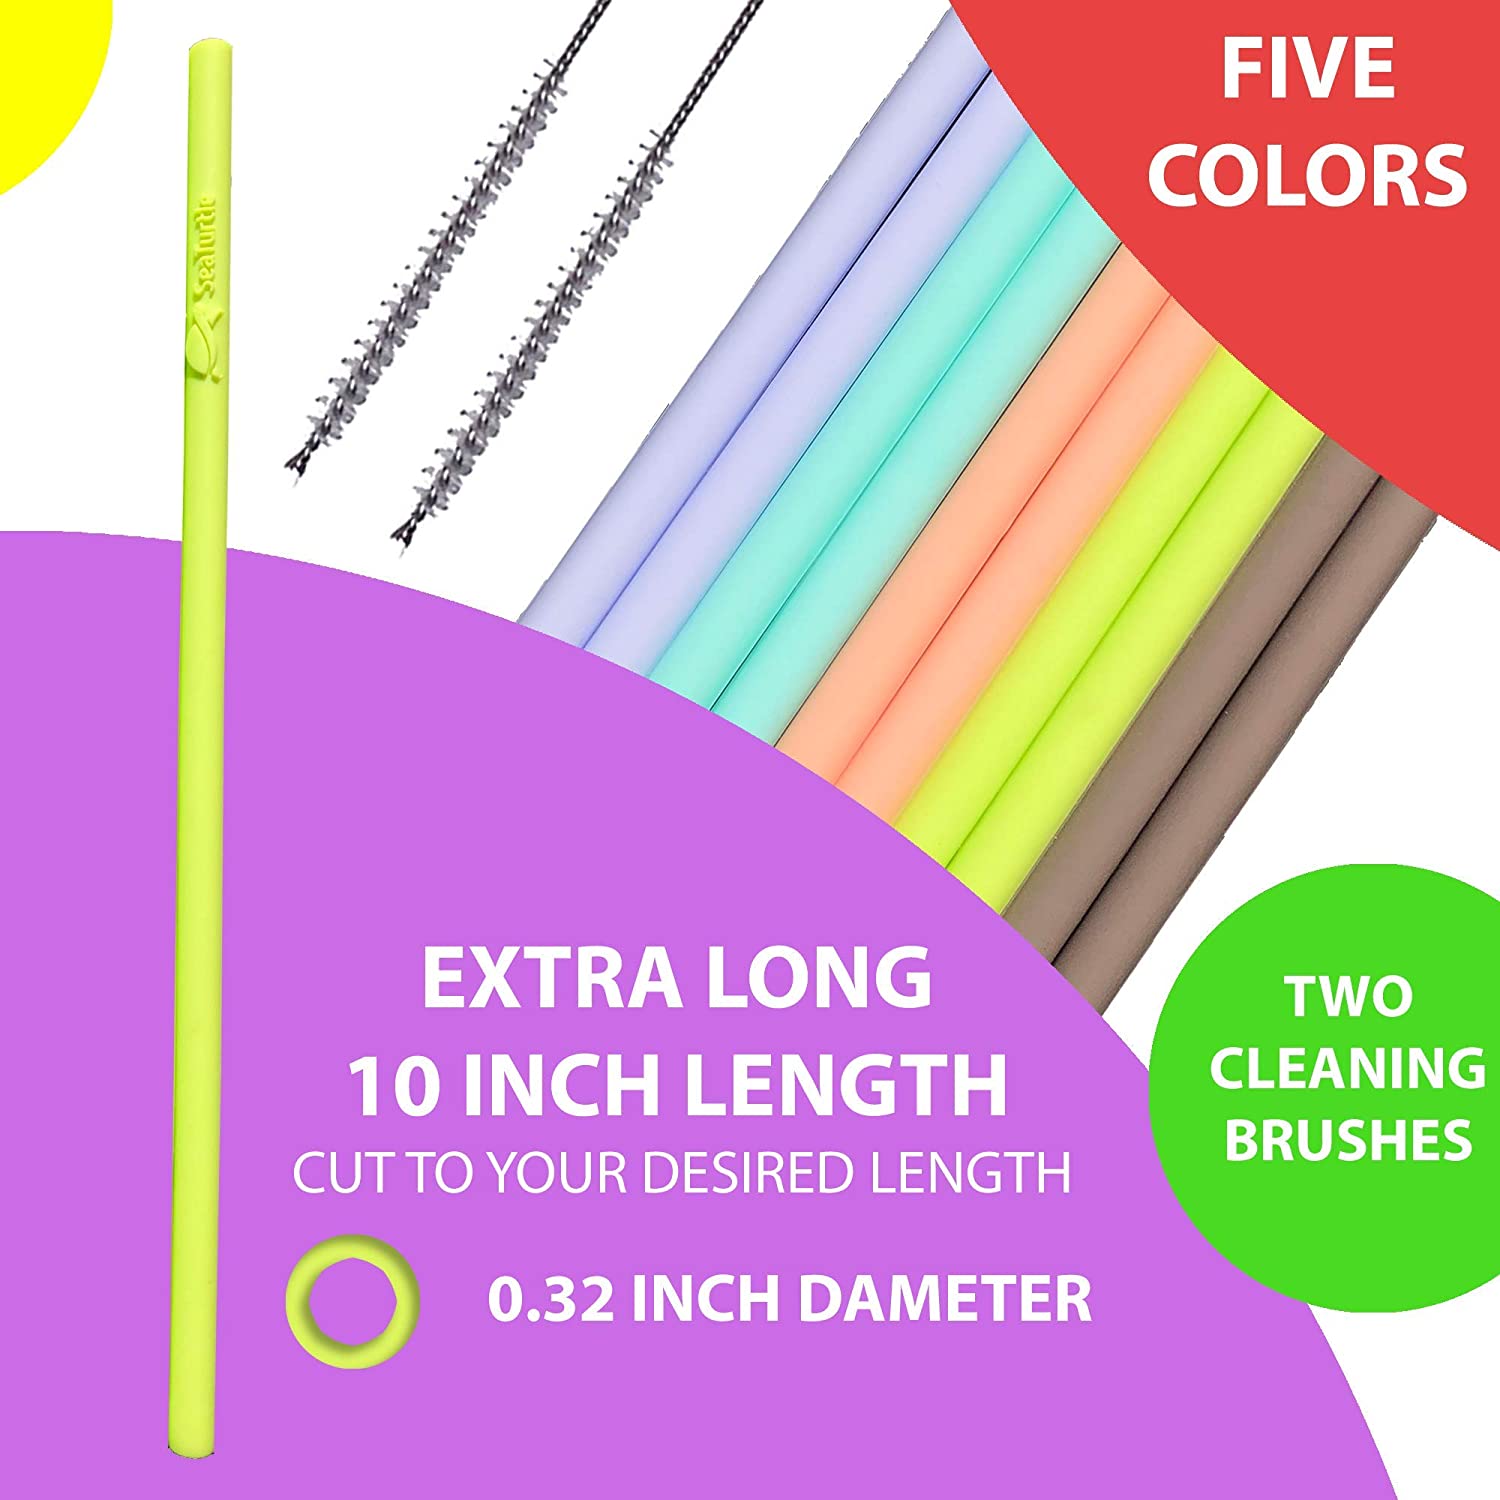 10.5 In Long Rainbow Colored Reusable Tritan Plastic Replacement Straws For  20 O